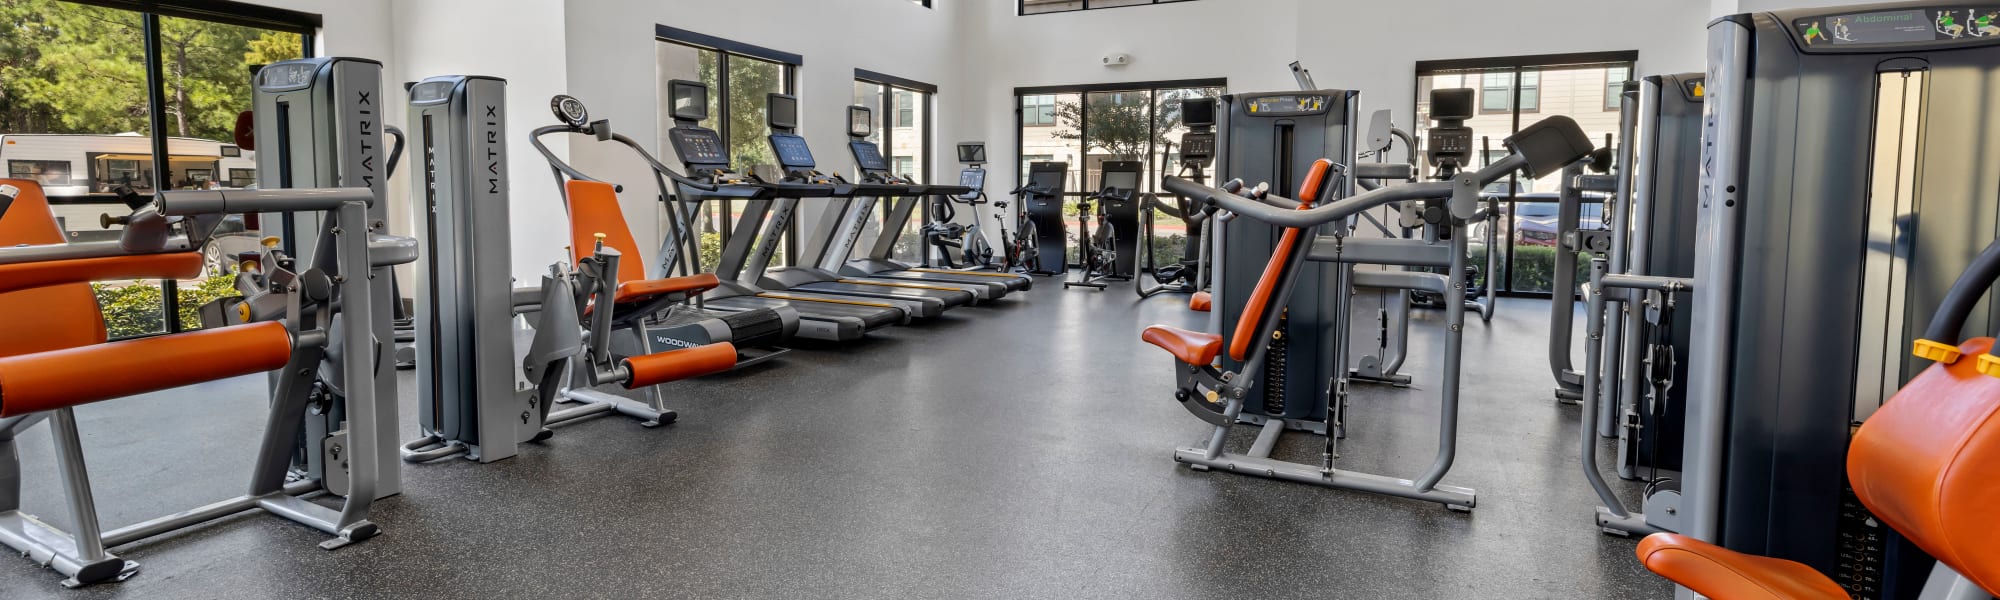 Amenities (fitness center) at Olympus Auburn Lakes in Spring, Texas